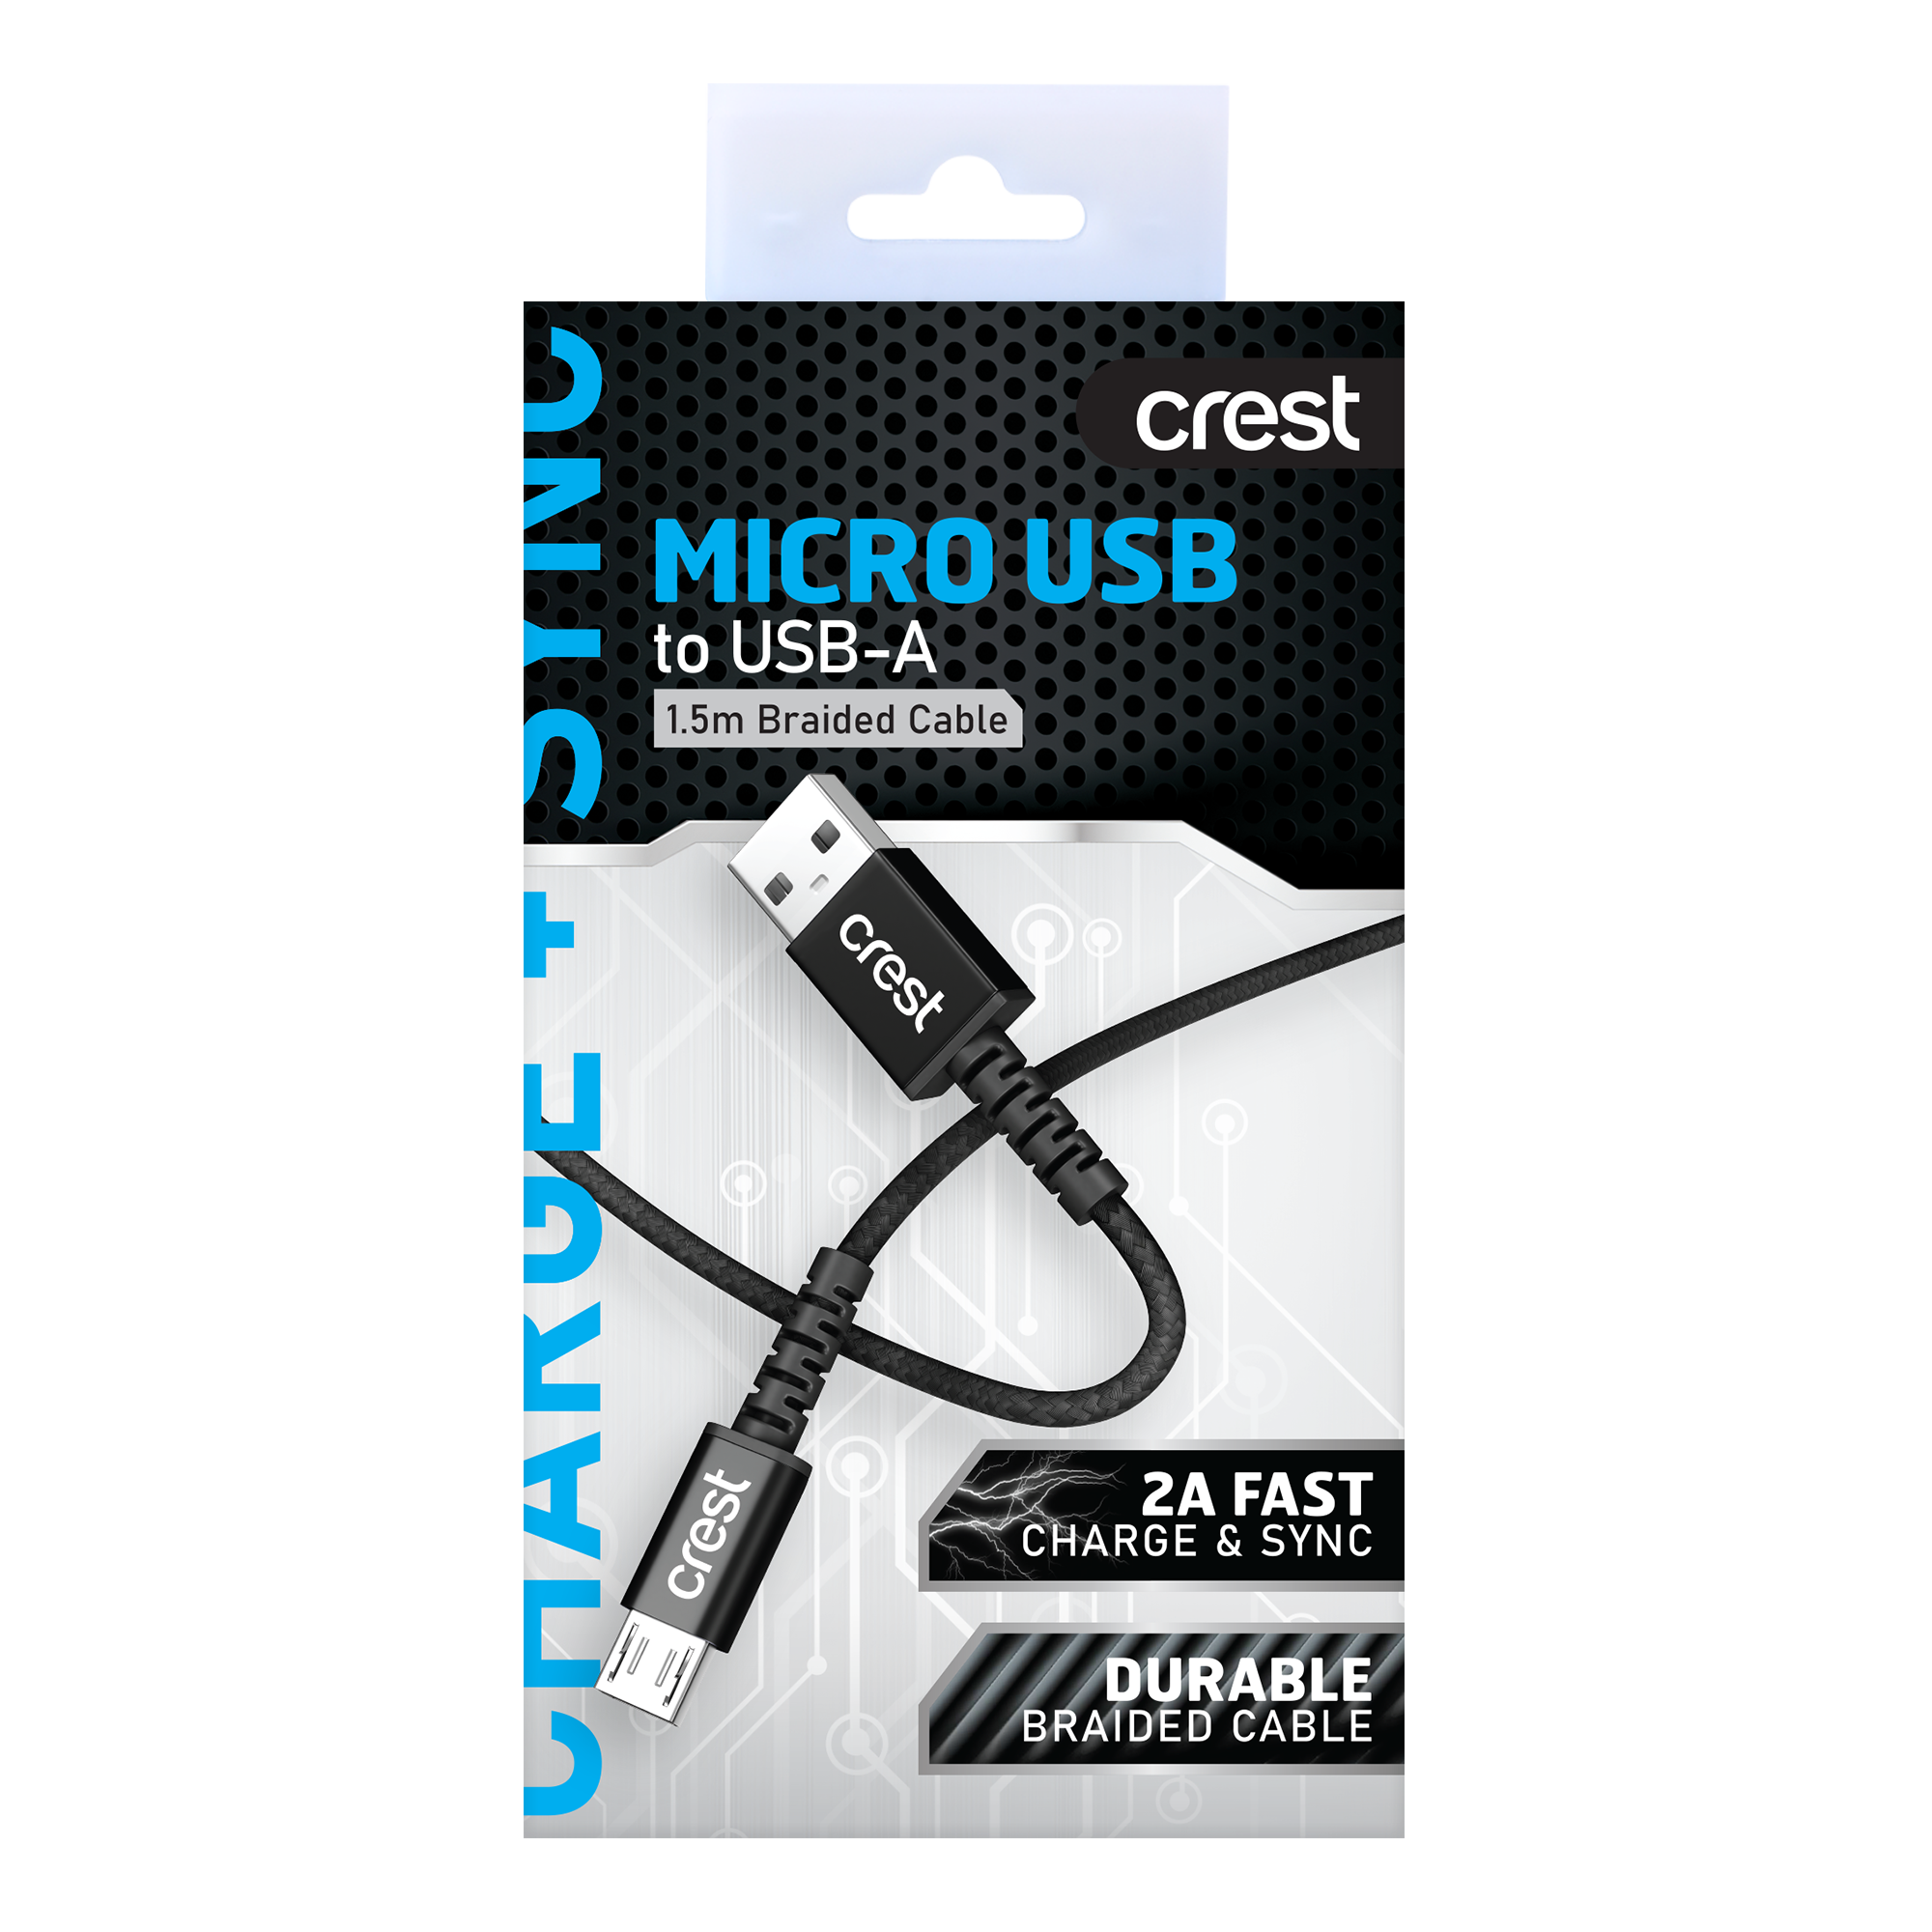 Micro USB to USB-A Braided Cable 1.5M - Black